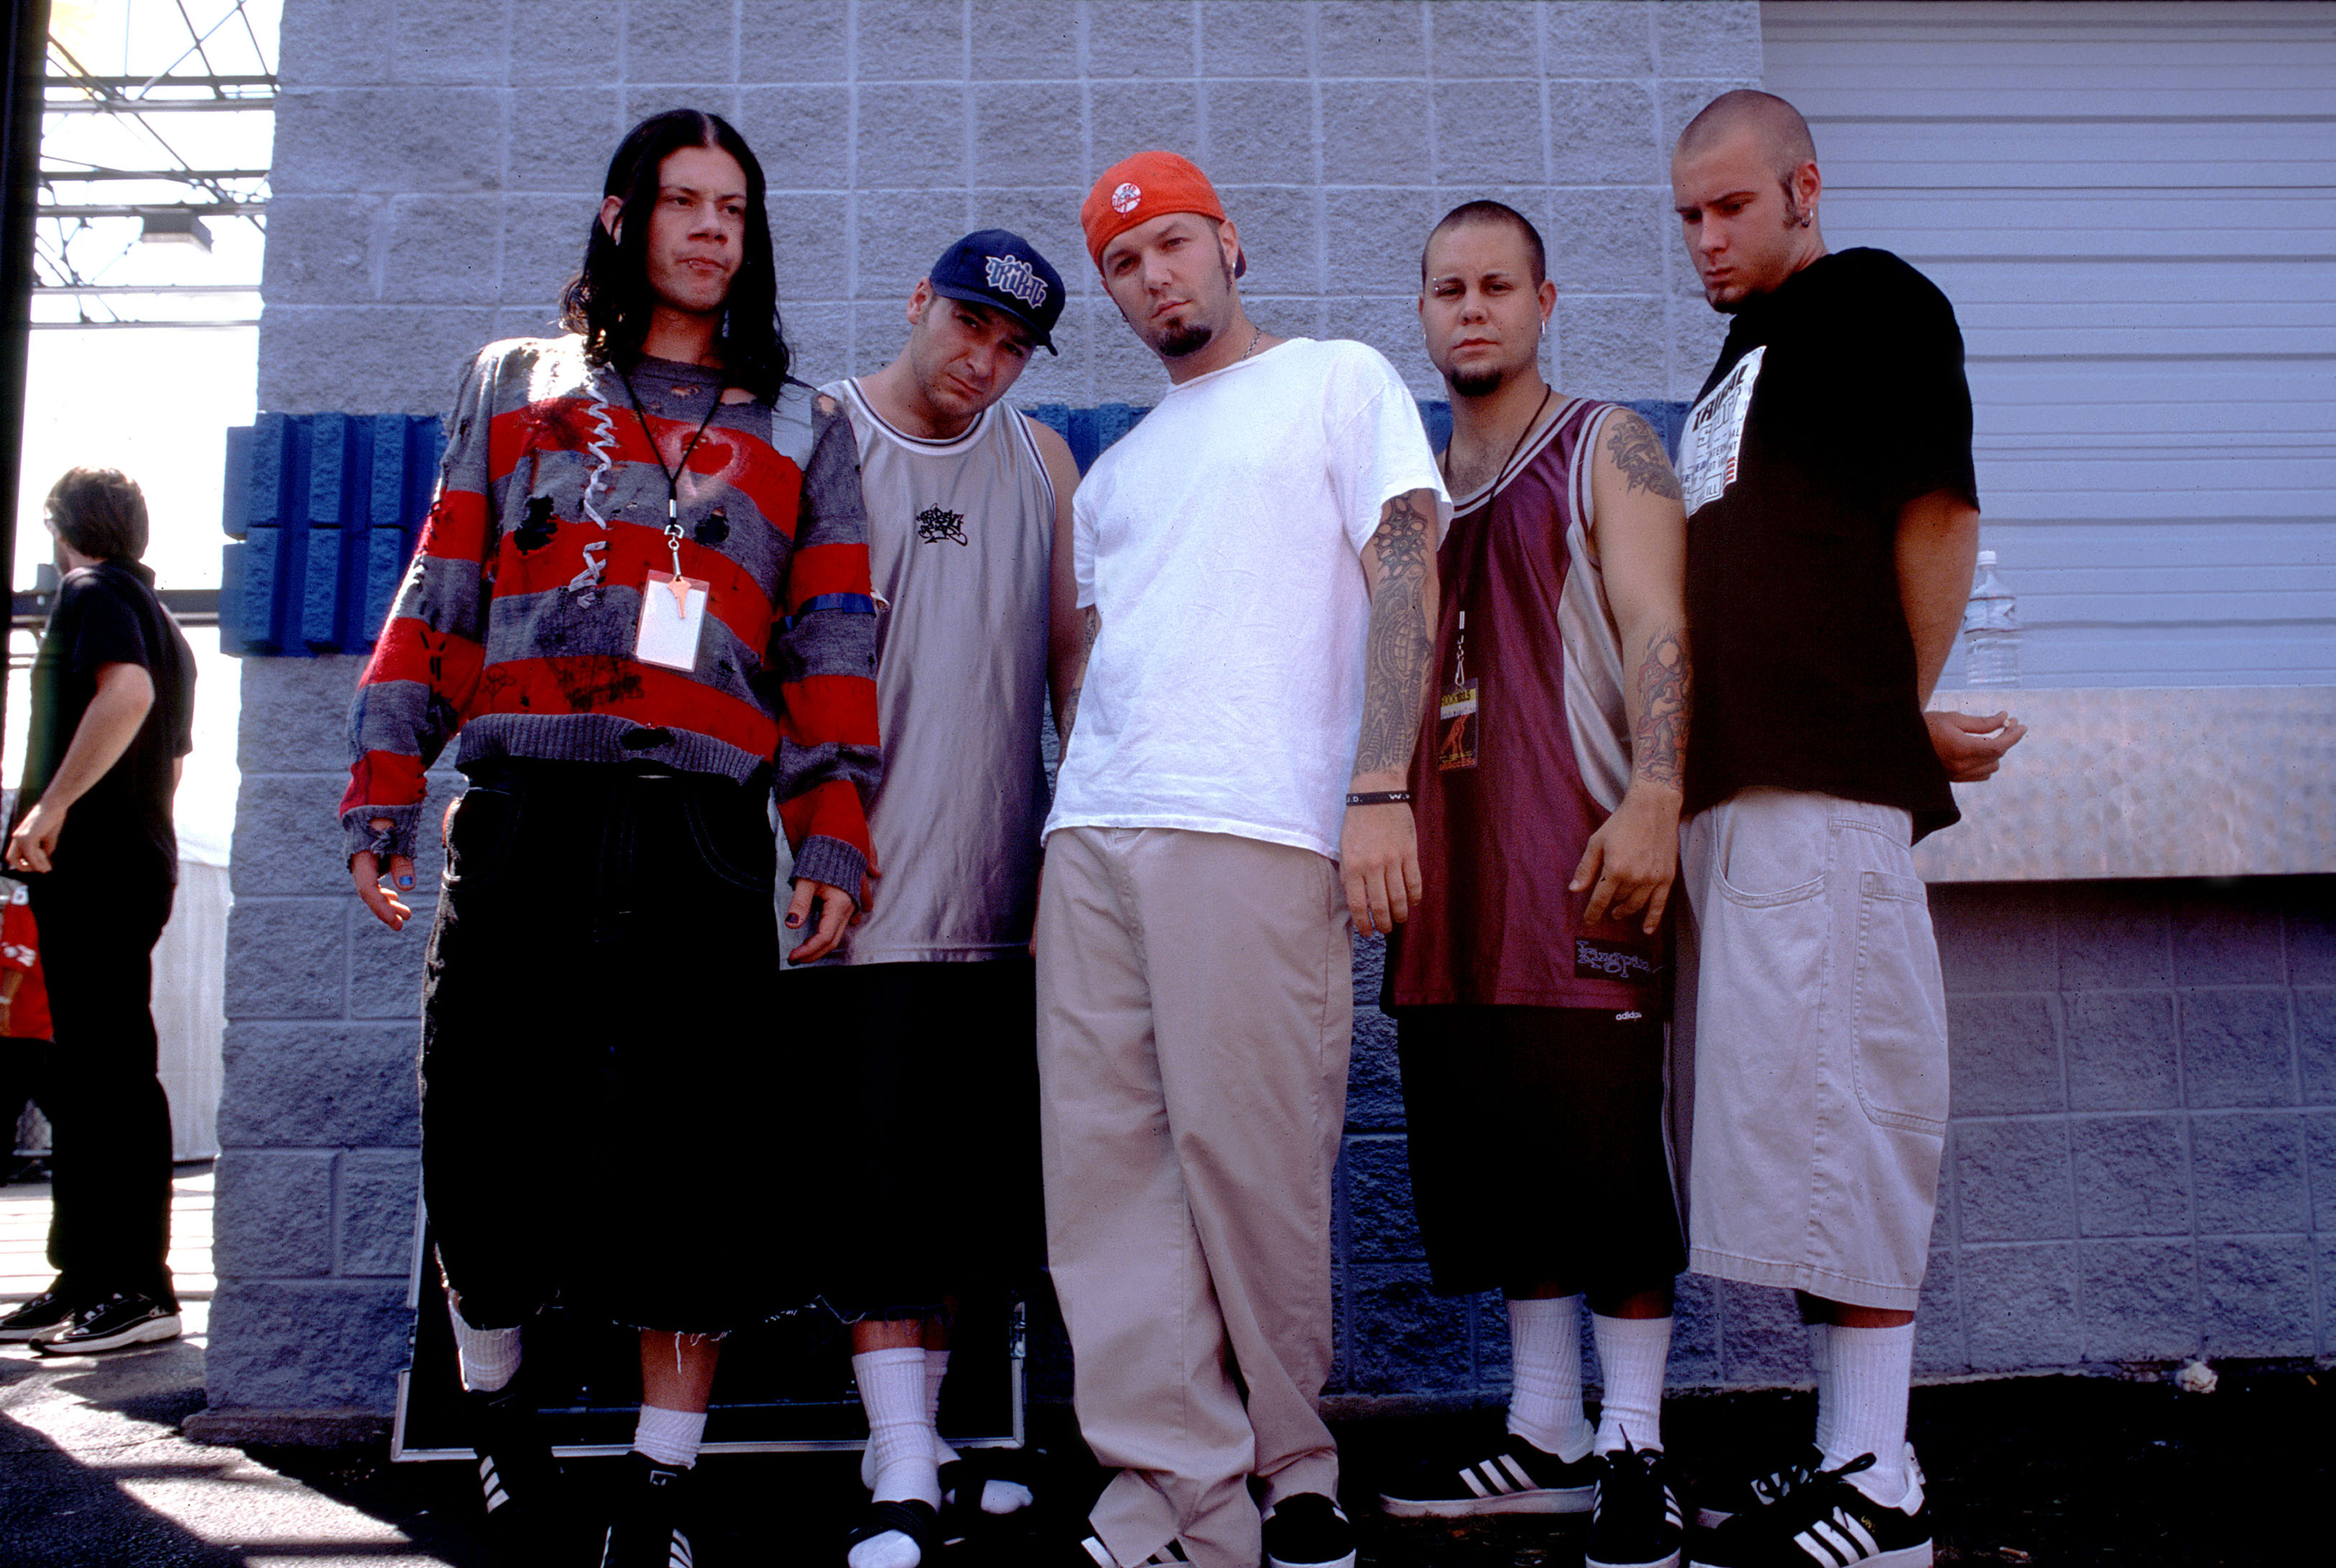 The star found fame in the rock band Limp Bizkit